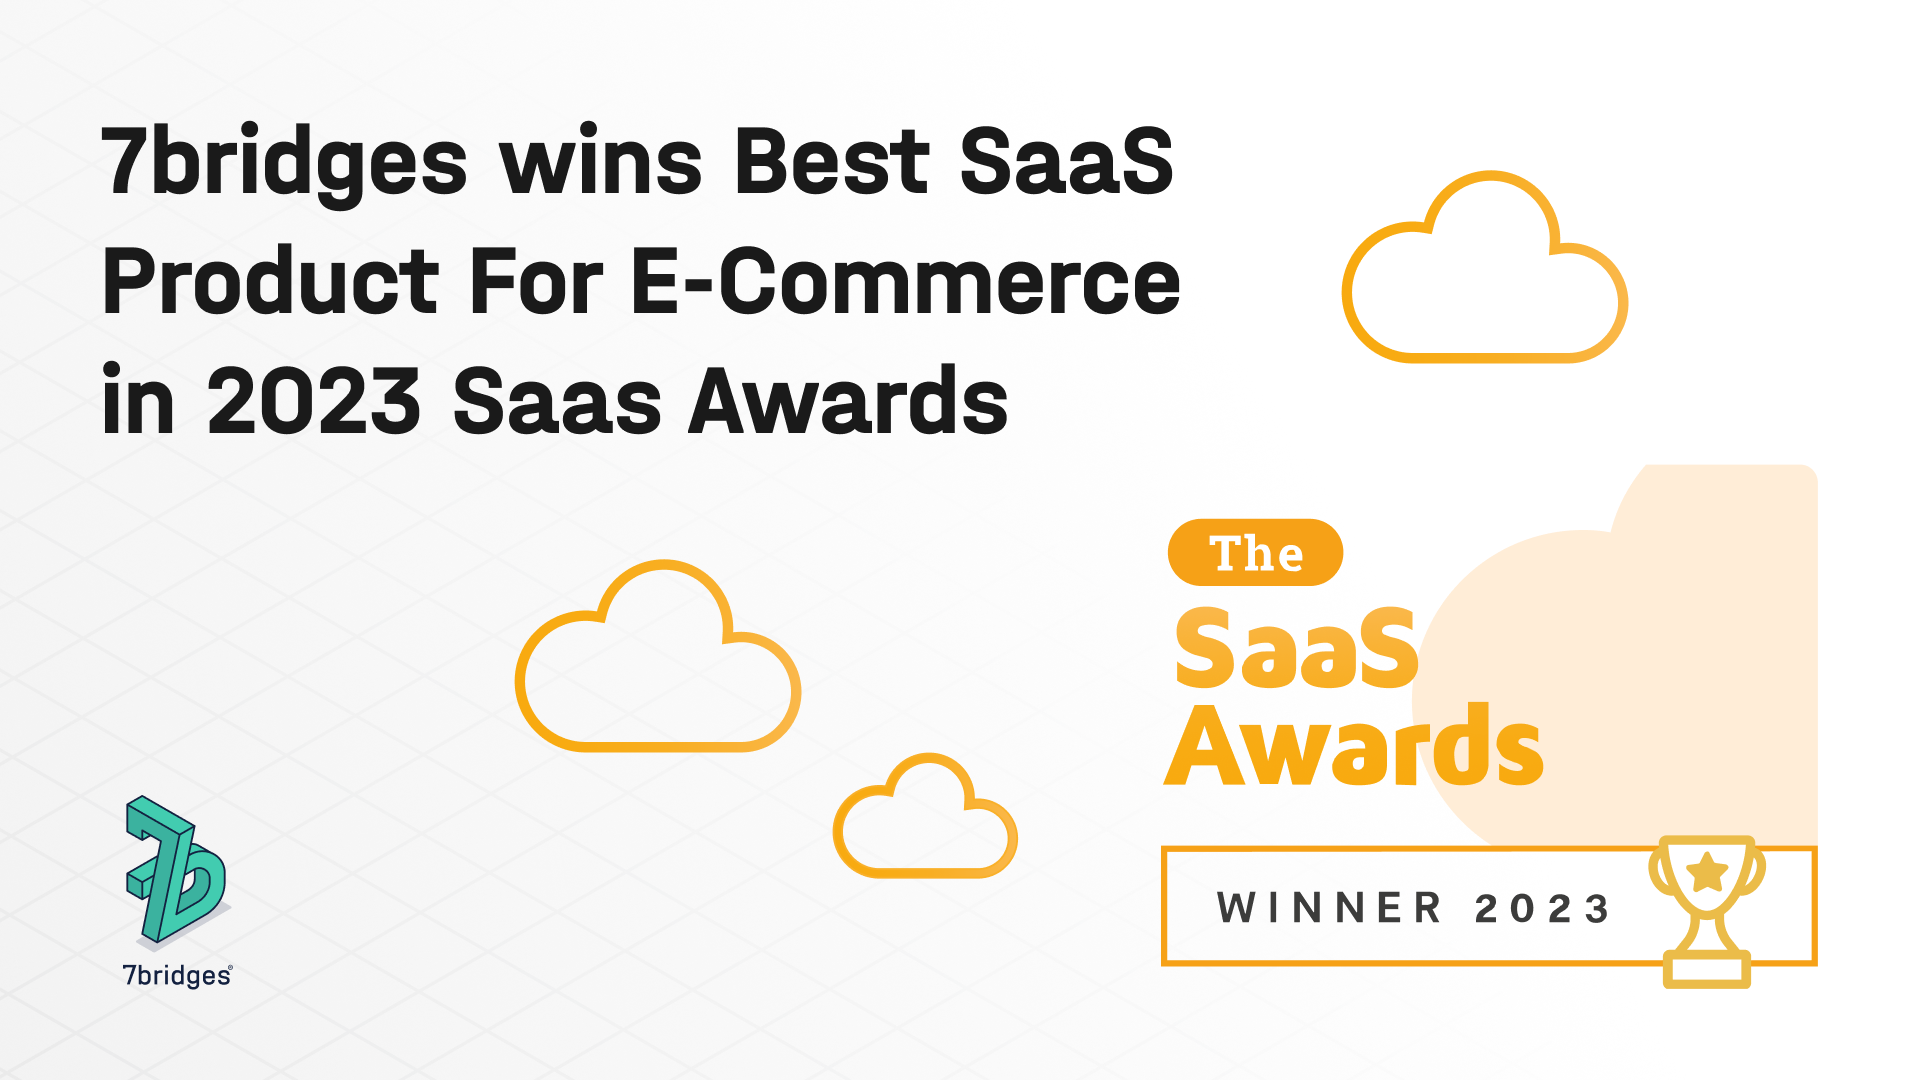 7bridges wins Best SaaS Product for E-Commerce at 2023 SaaS Awards